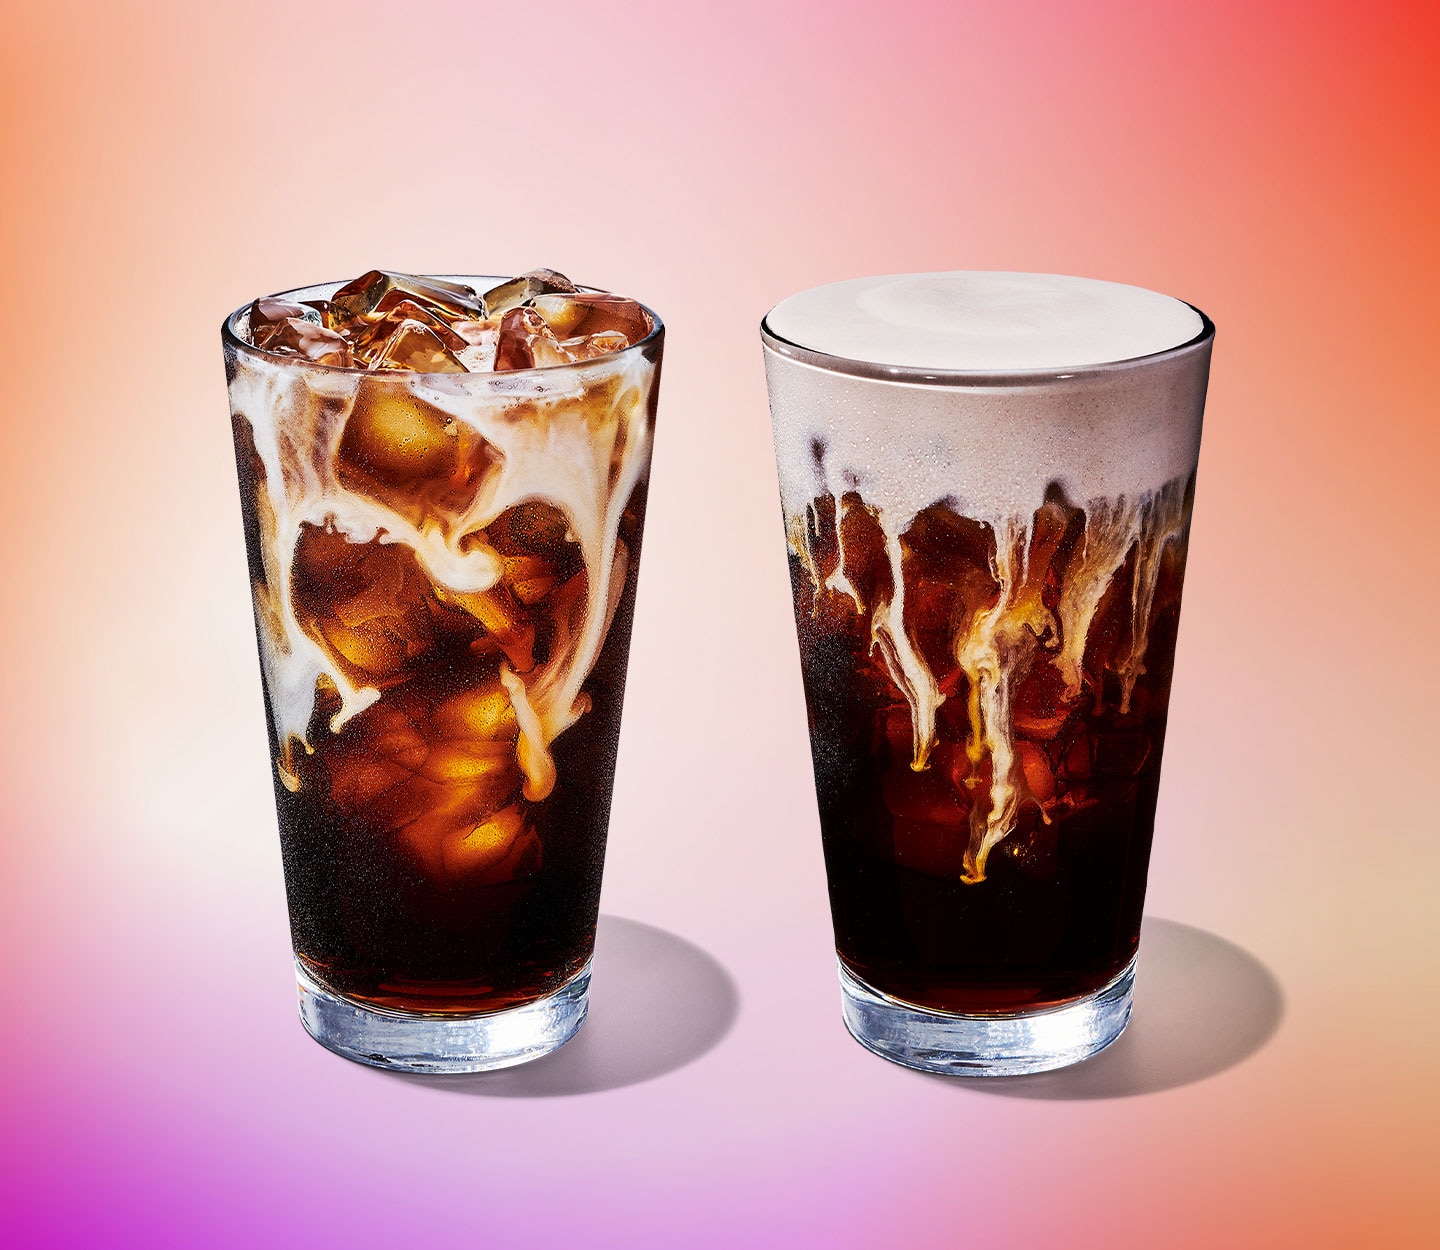 Two iced coffee drinks with creamy, foamy toppings swirling throughout the glass.